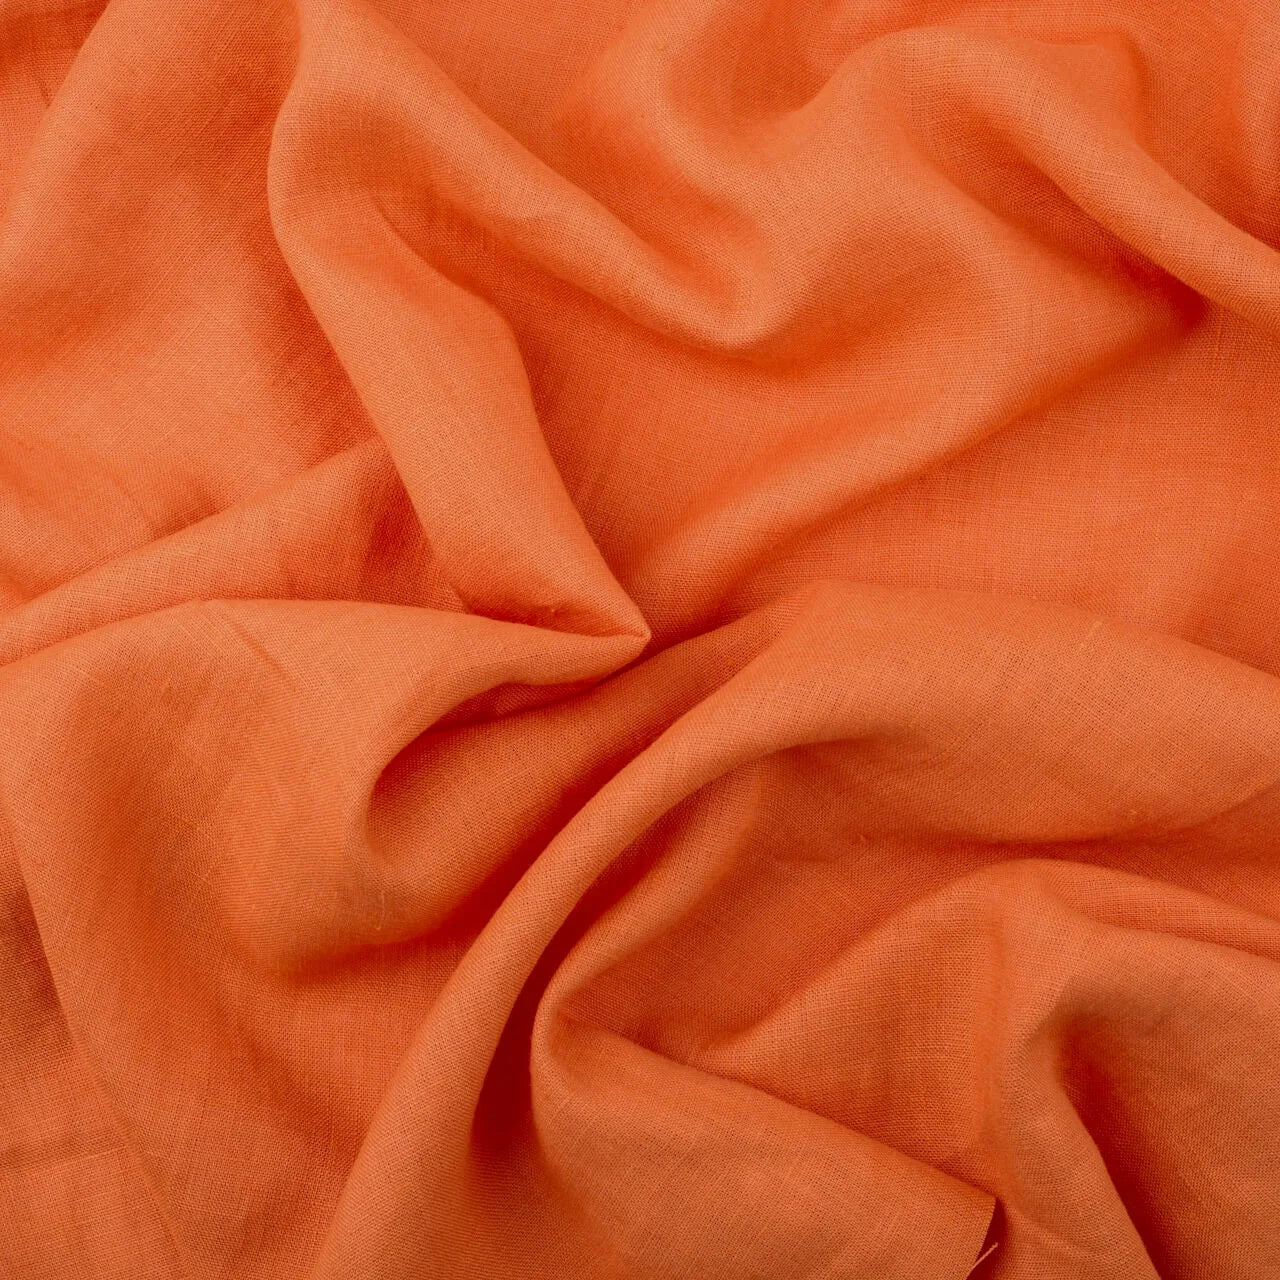 Washed Pure Tangerine Linen Fabric 205 g/m²